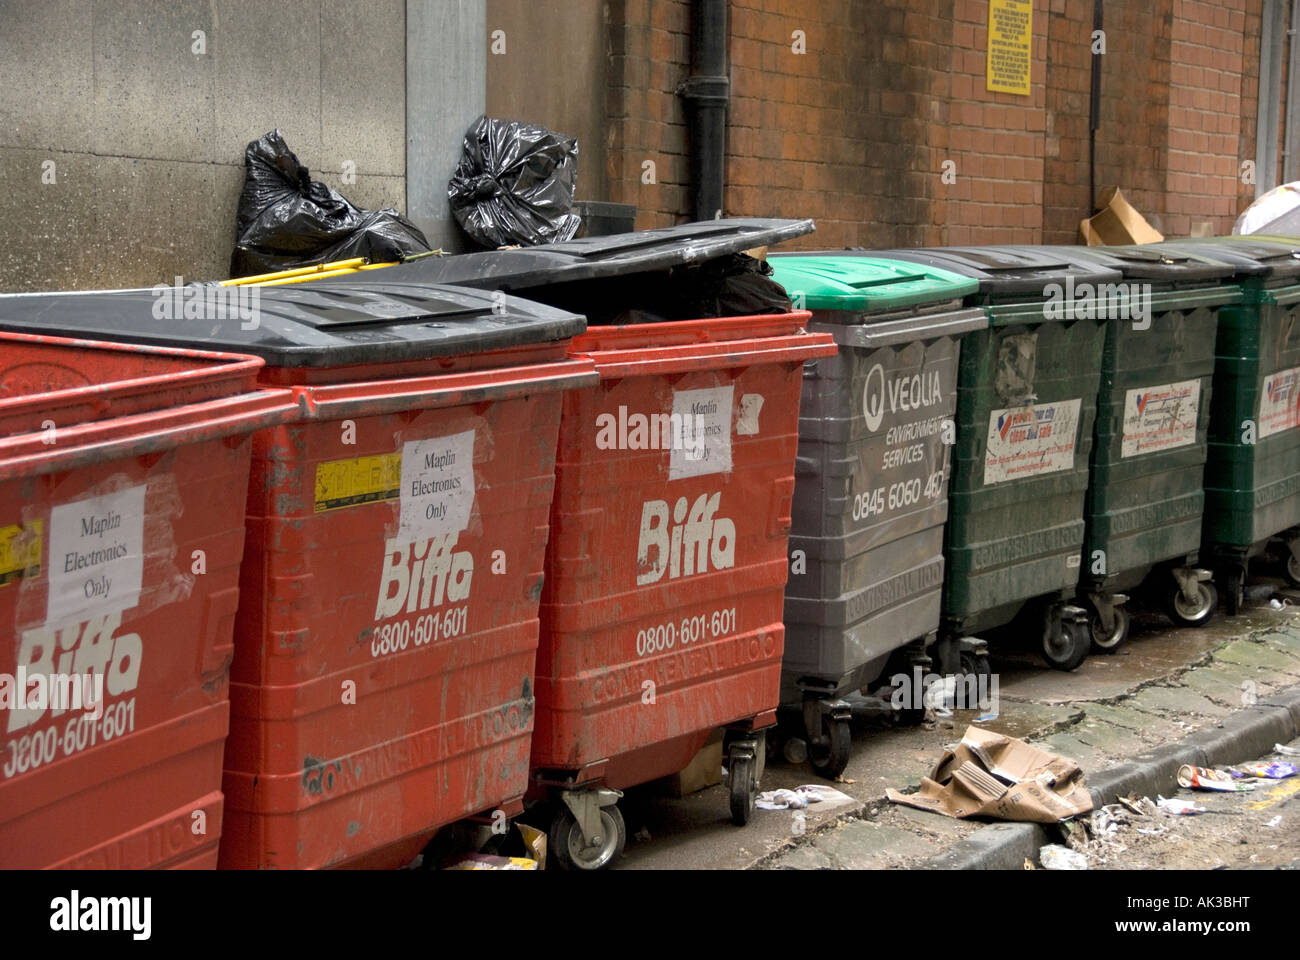 rubbish containers in a street in birmingham used as commercial bins Stock Photo